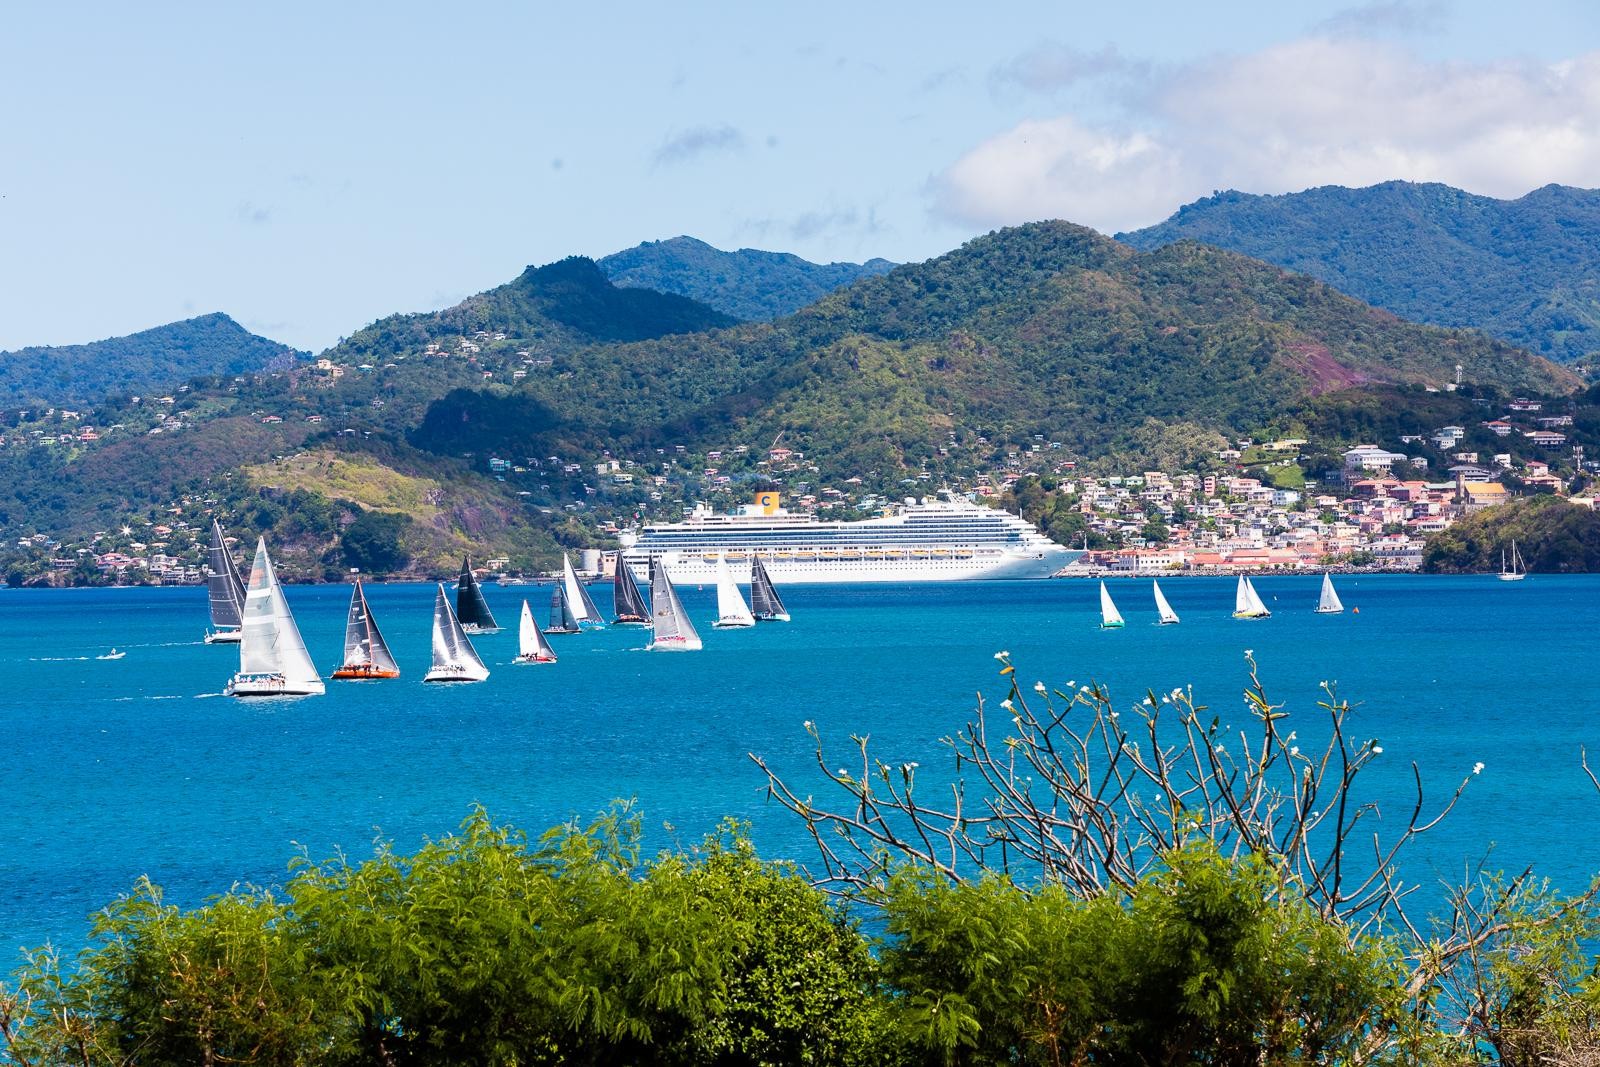 A mixed fleet of cruising and racing yachts enjoyed perfect sailing conditions on the first day of Grenadaʼs annual Sailing Week regatta.